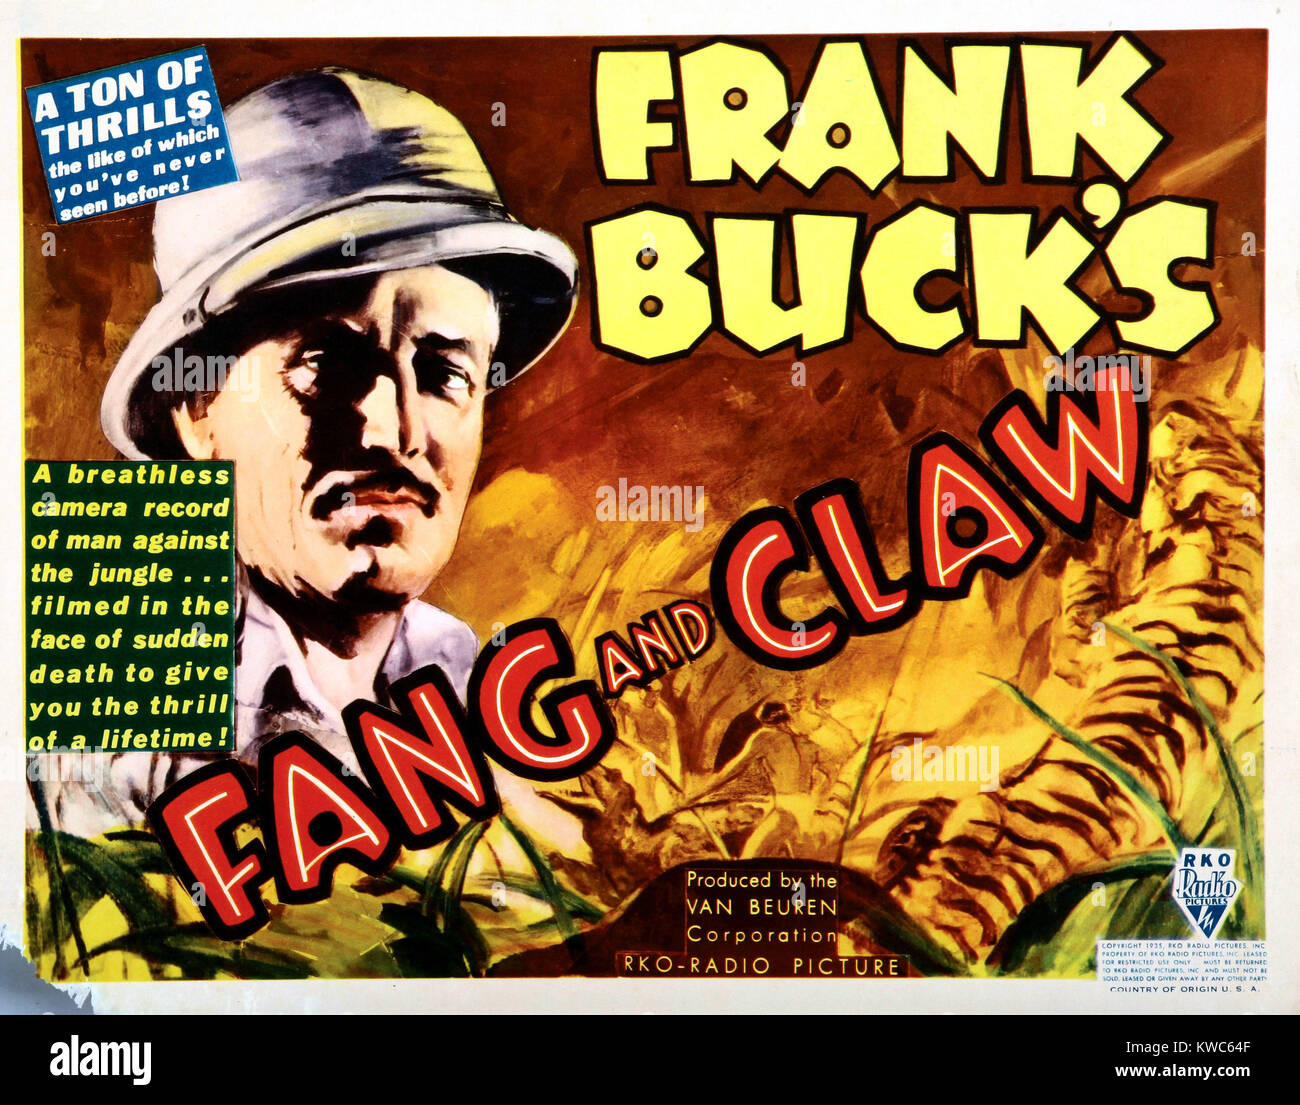 FANG AND CLAW, Frank Buck, 1935 Stock Photo